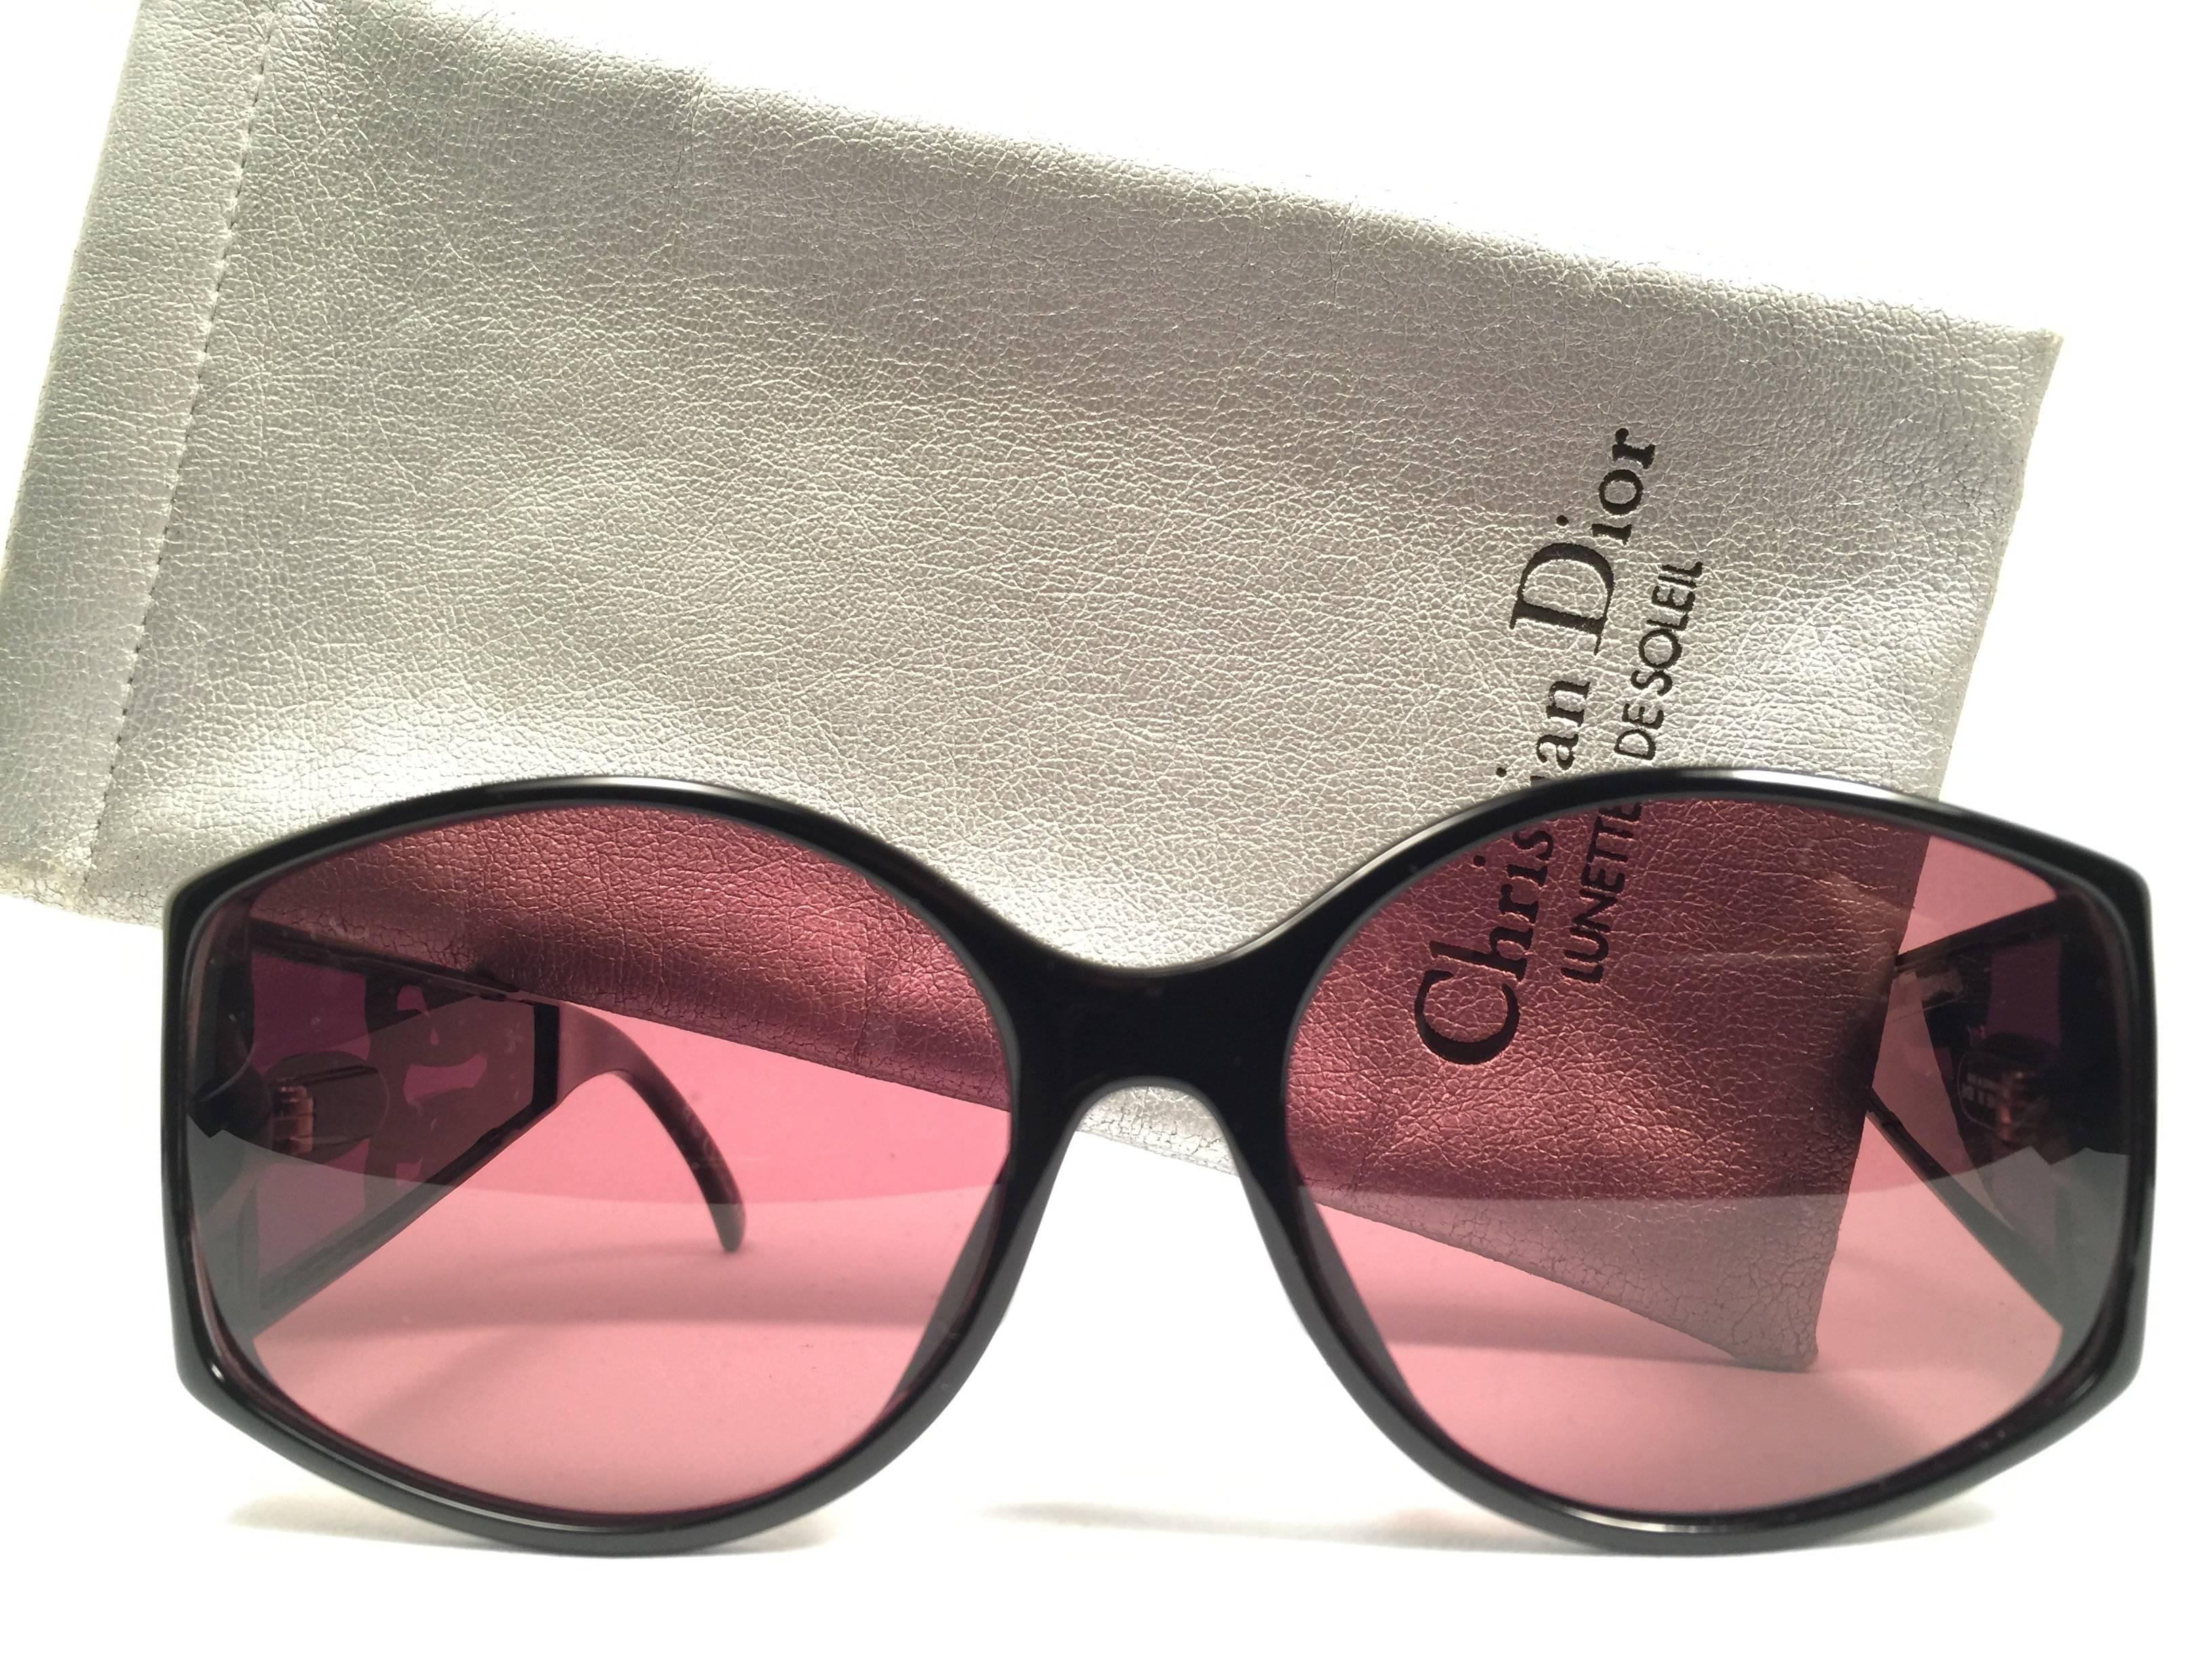 Mint Vintage Christian Dior 2435 1980's frame with spotless lenses.   
Made in Germany.  

Comes with its original silver Christian Dior Lunettes sleeve.